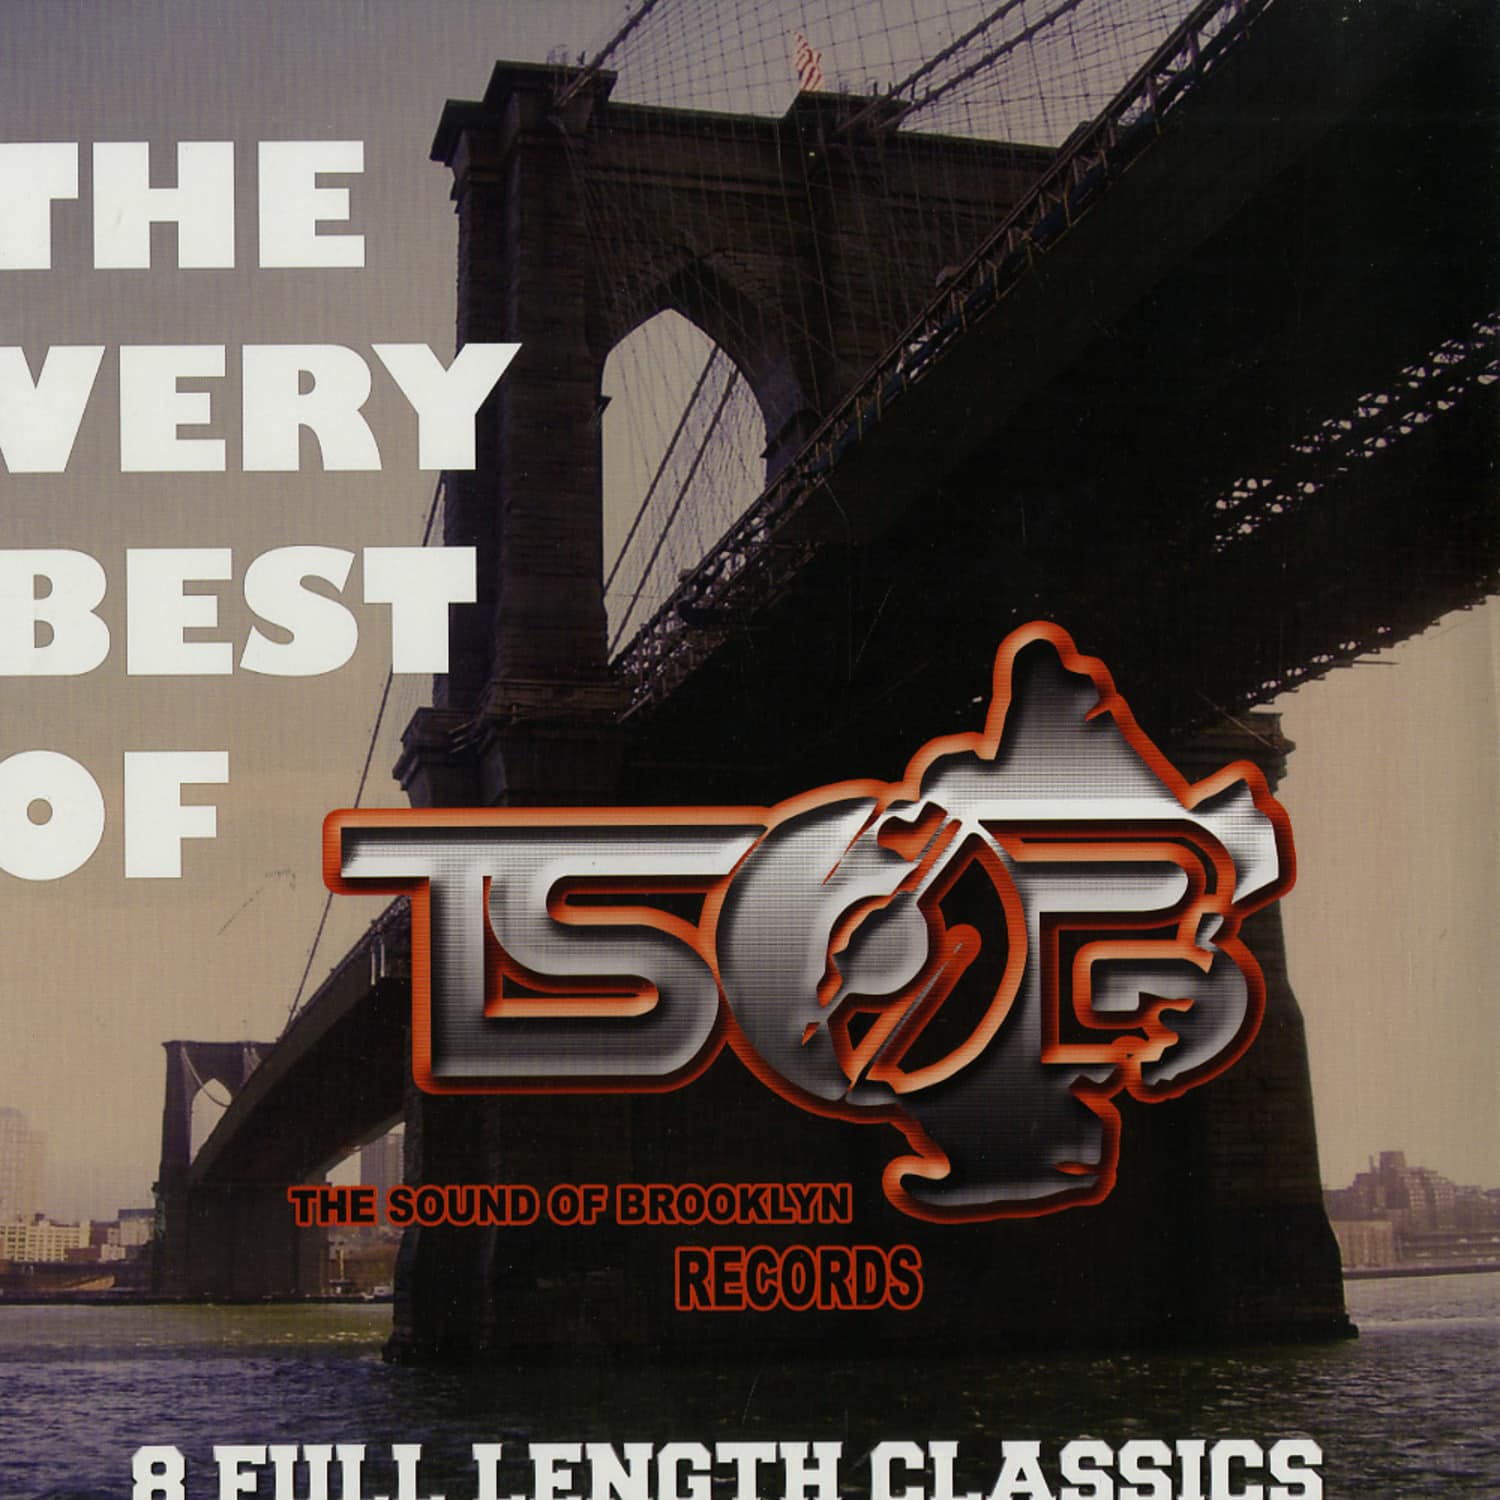 Various Artists - THE VERY BEST OF T.S.O.B. RECORDS 